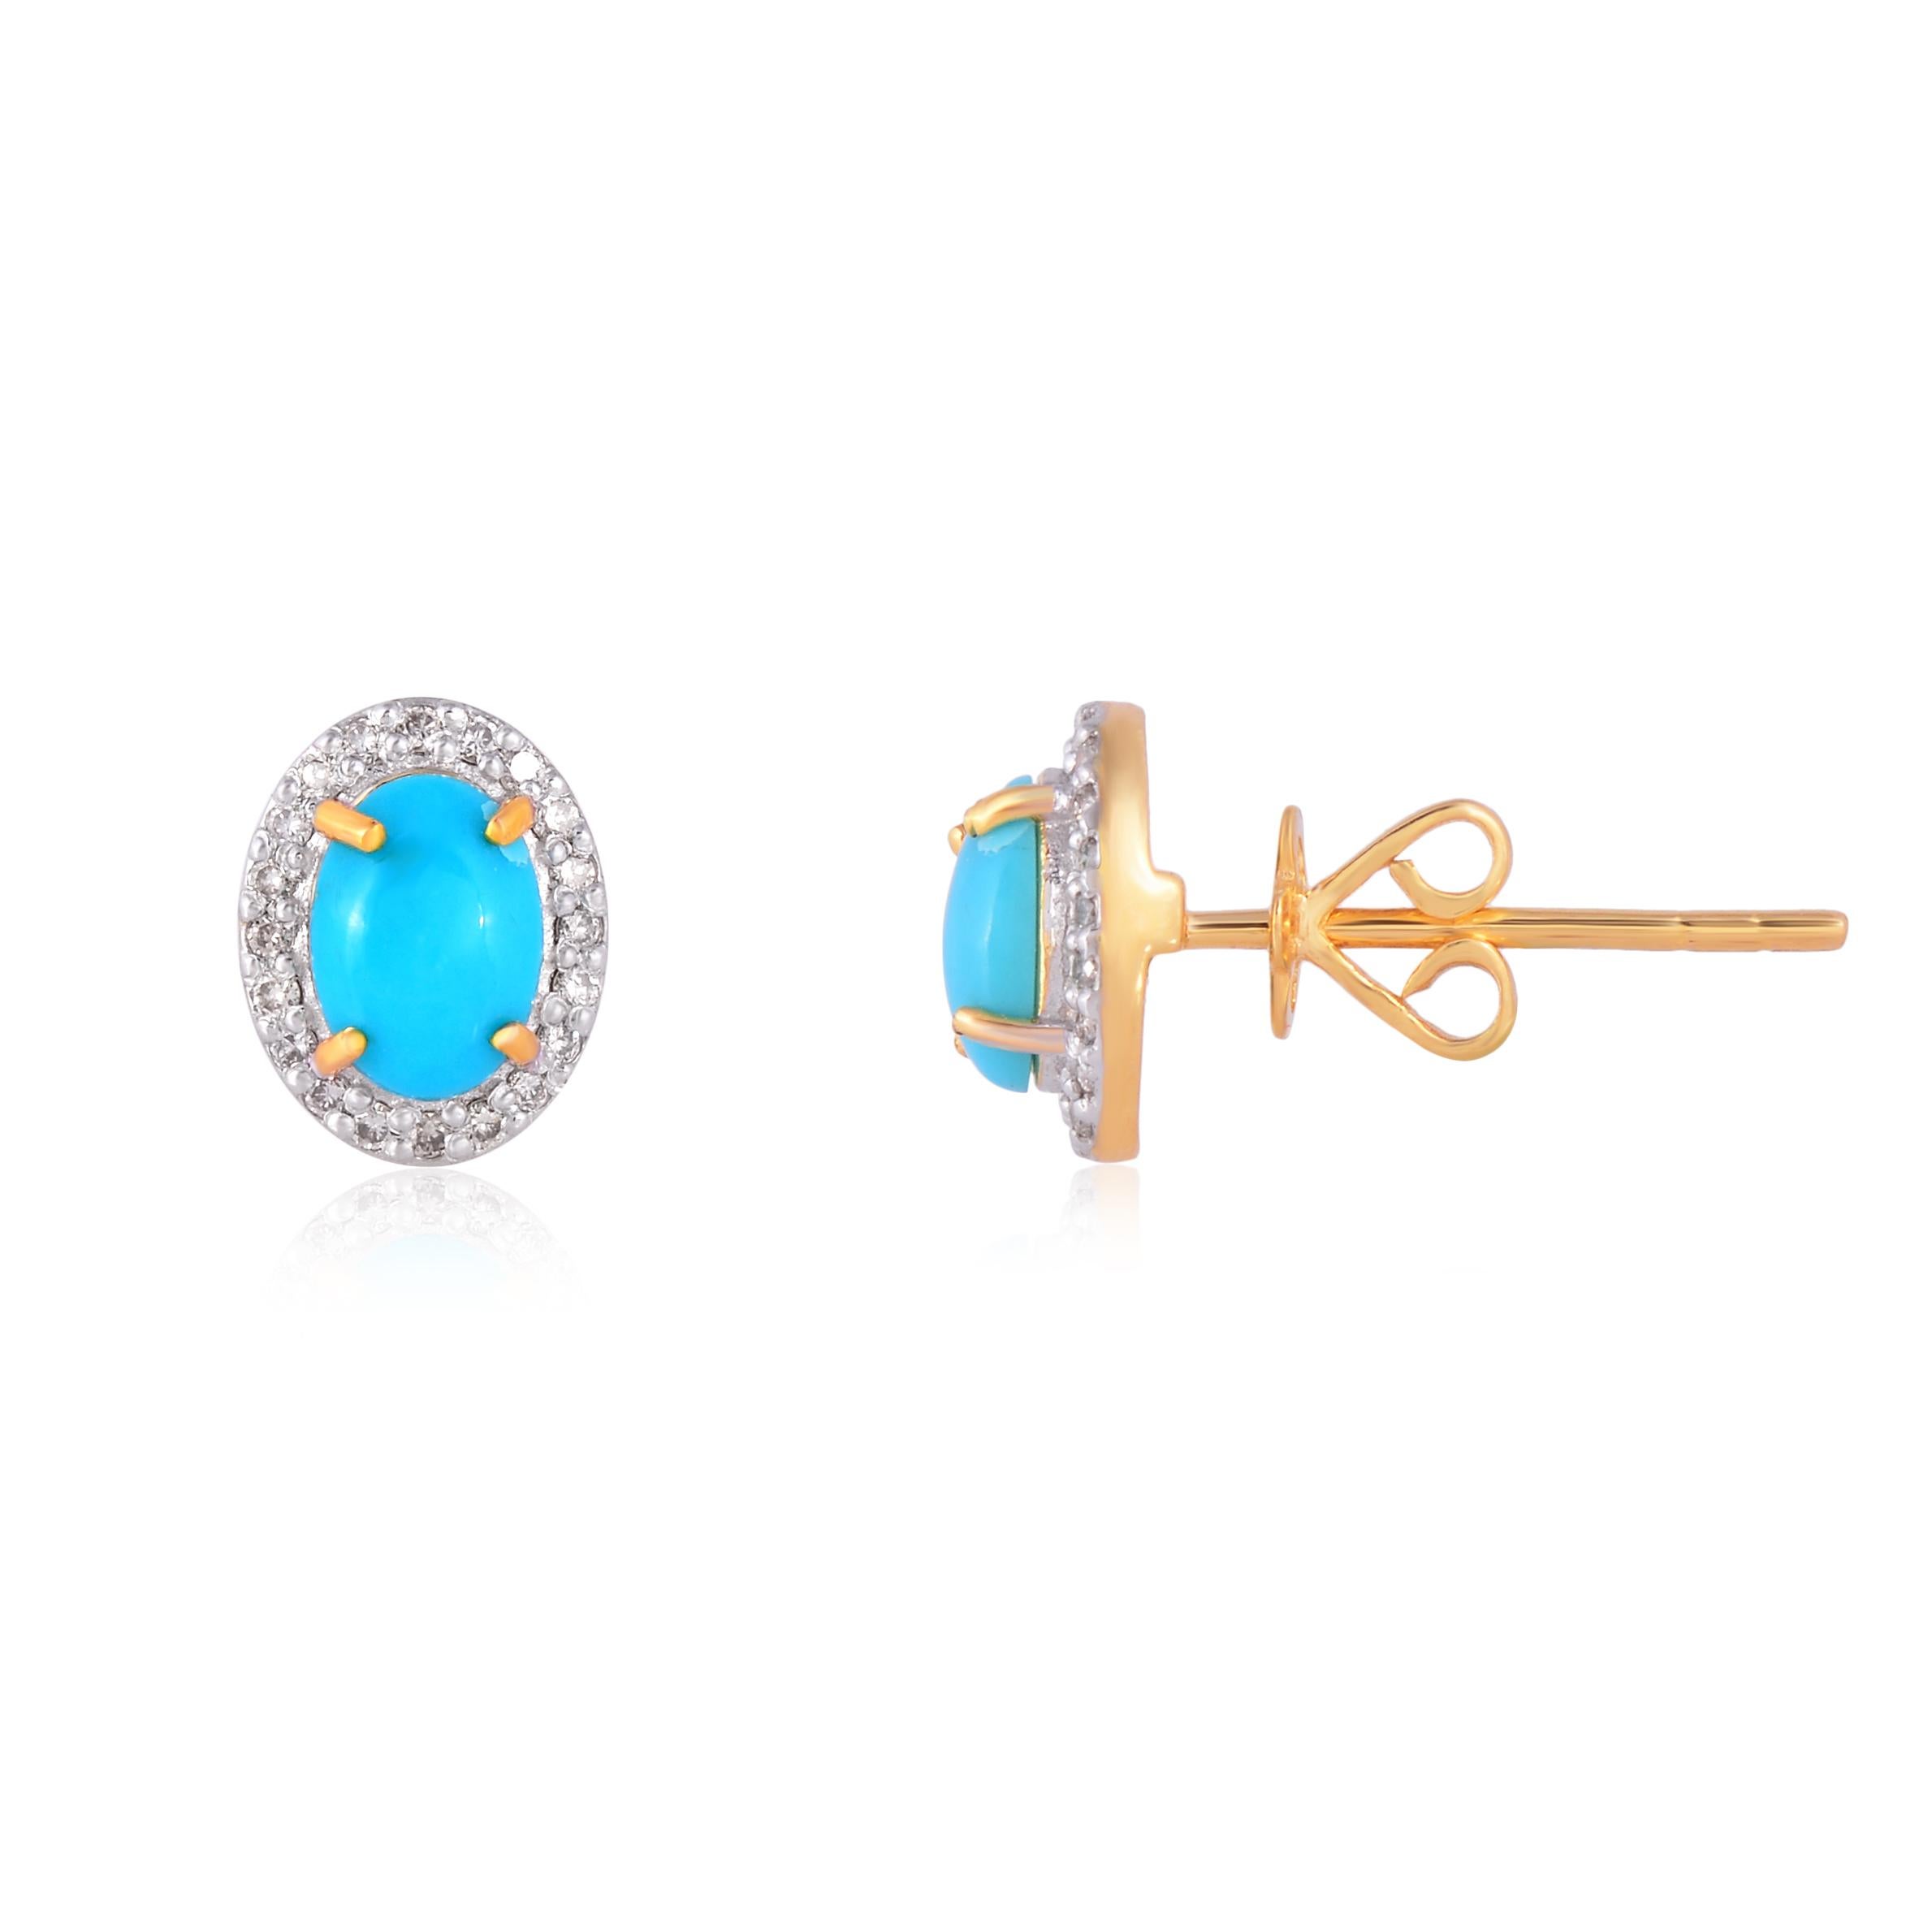 These are Beautiful 18K Gold Stud Earrings with high-quality diamond and turquoise.
Specifications:- 
Gross Weight: 3.00 grams
Gold Weight: 2.642 grams
Turquoise Weight: 1.2 Cts
Diamond Weight:  0.22 Cts
Dimensions : 10 x 8 mm
SKU : 